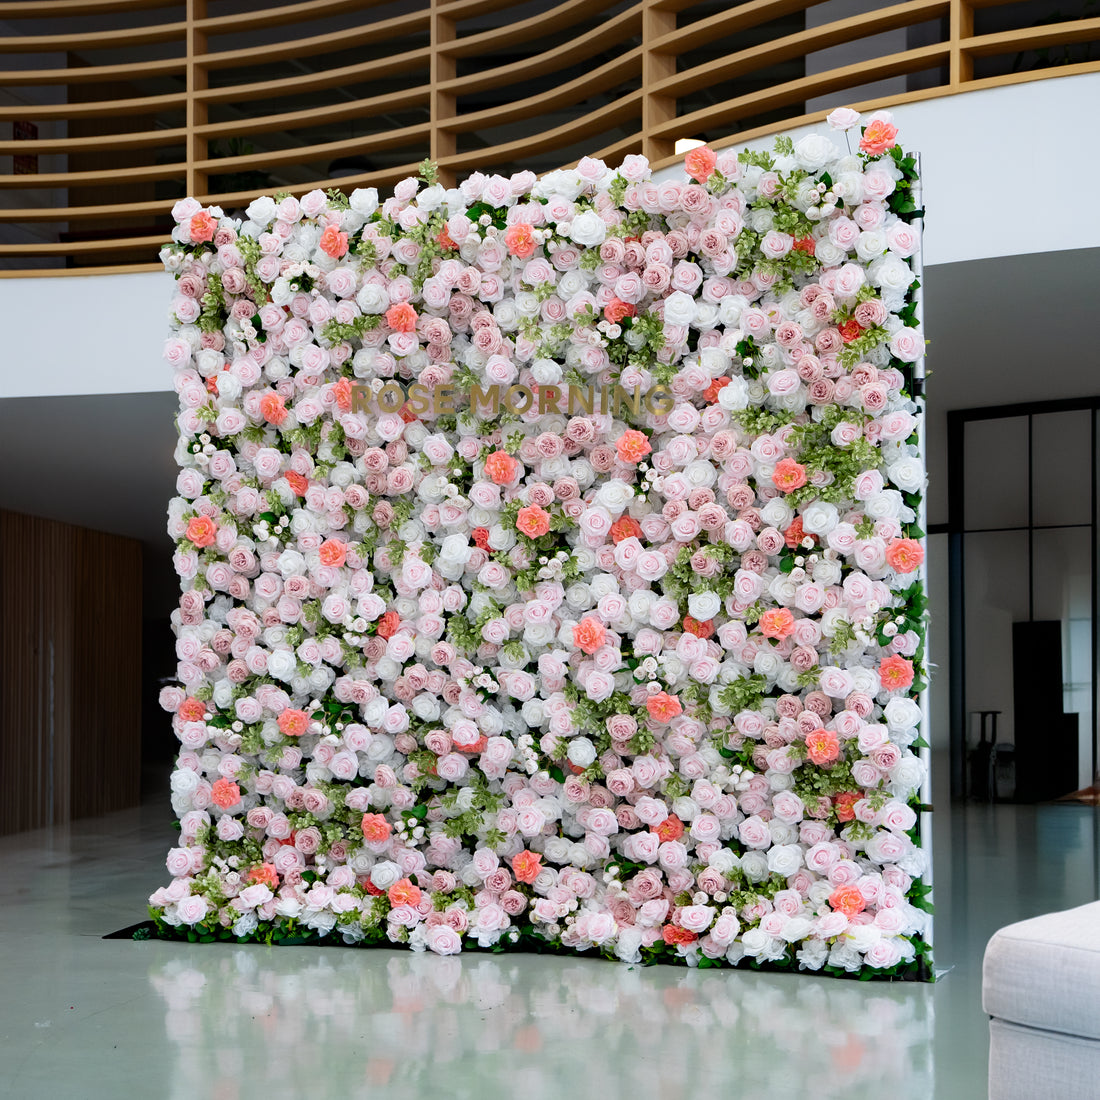 Kaisley：5D Fabric Artificial rolling up curtain flower wall (Ready to ship) Rose Morning